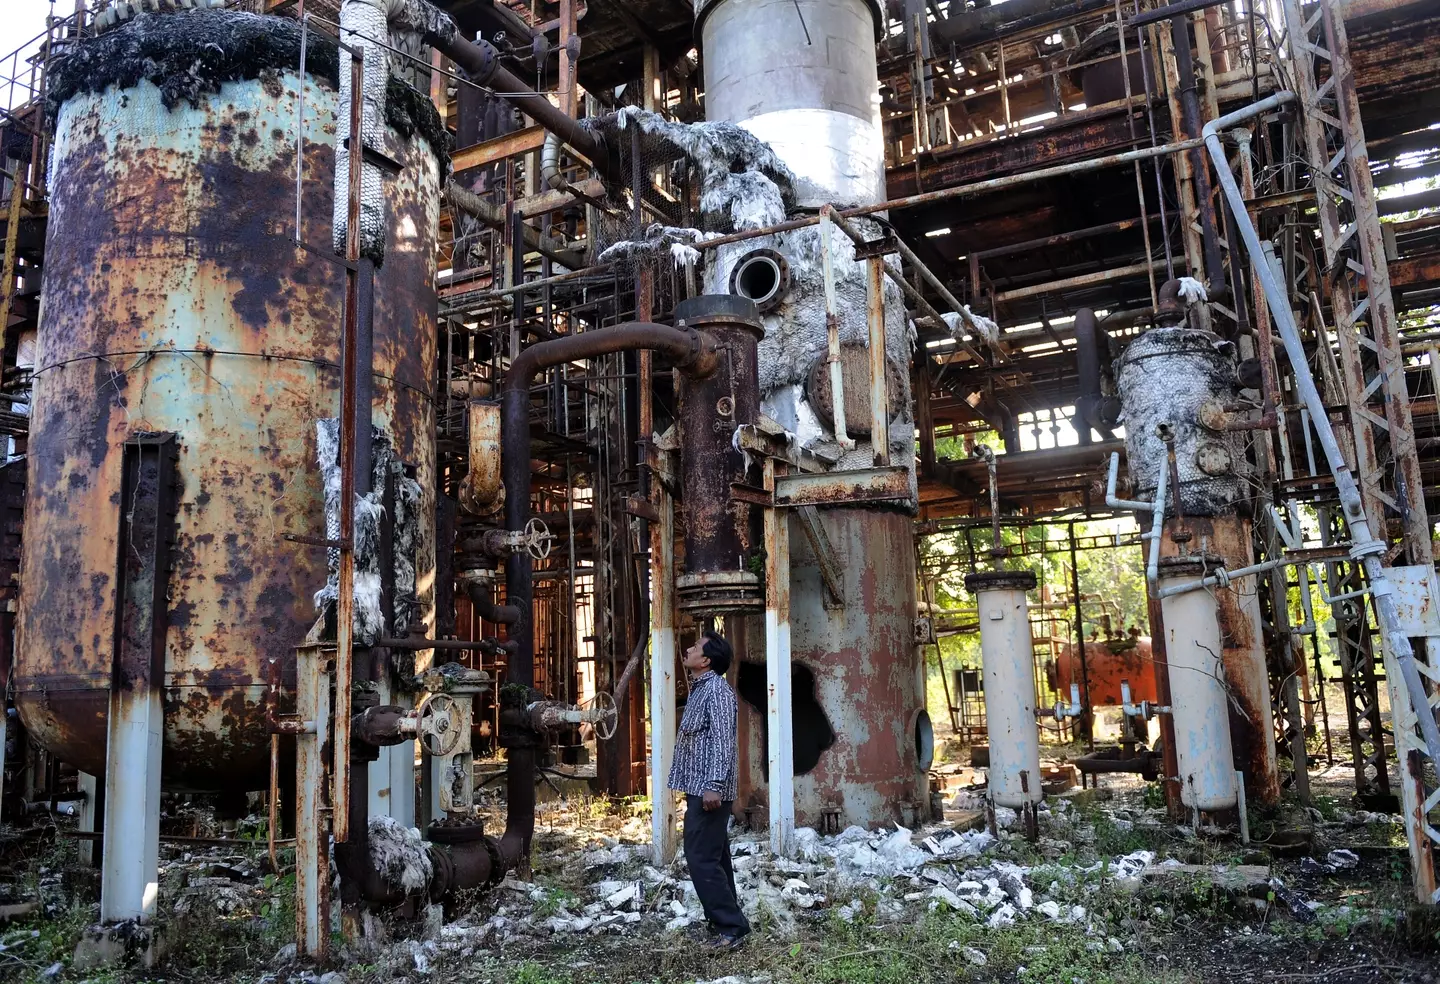 The remains of the plant. RAVEENDRAN/AFP via Getty Images